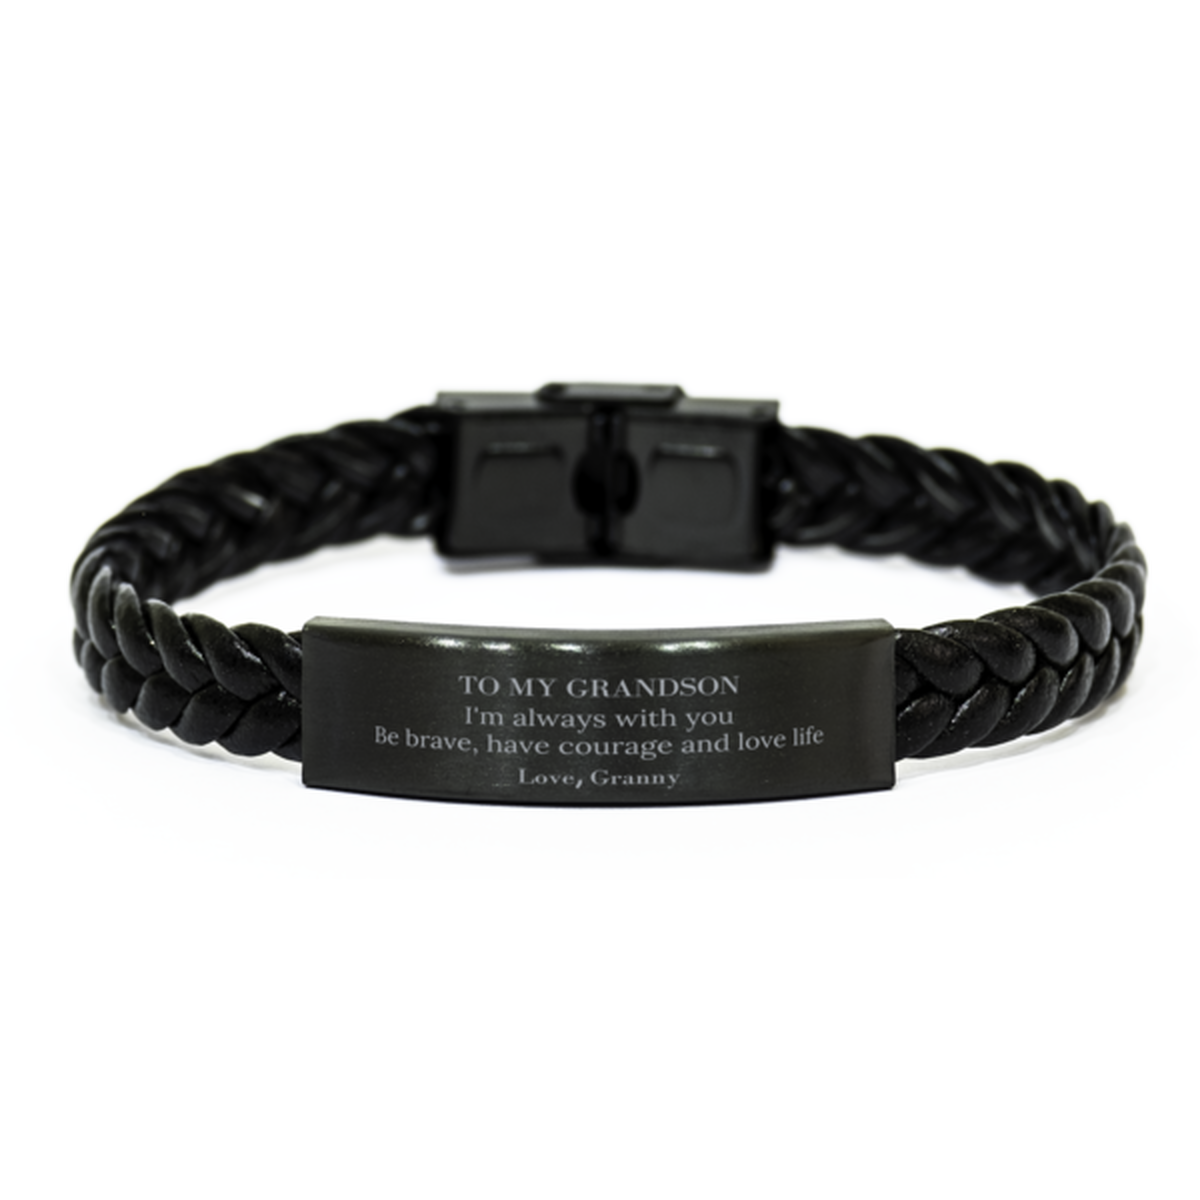 To My Grandson Gifts from Granny, Unique Braided Leather Bracelet Inspirational Christmas Birthday Graduation Gifts for Grandson I'm always with you. Be brave, have courage and love life. Love, Granny